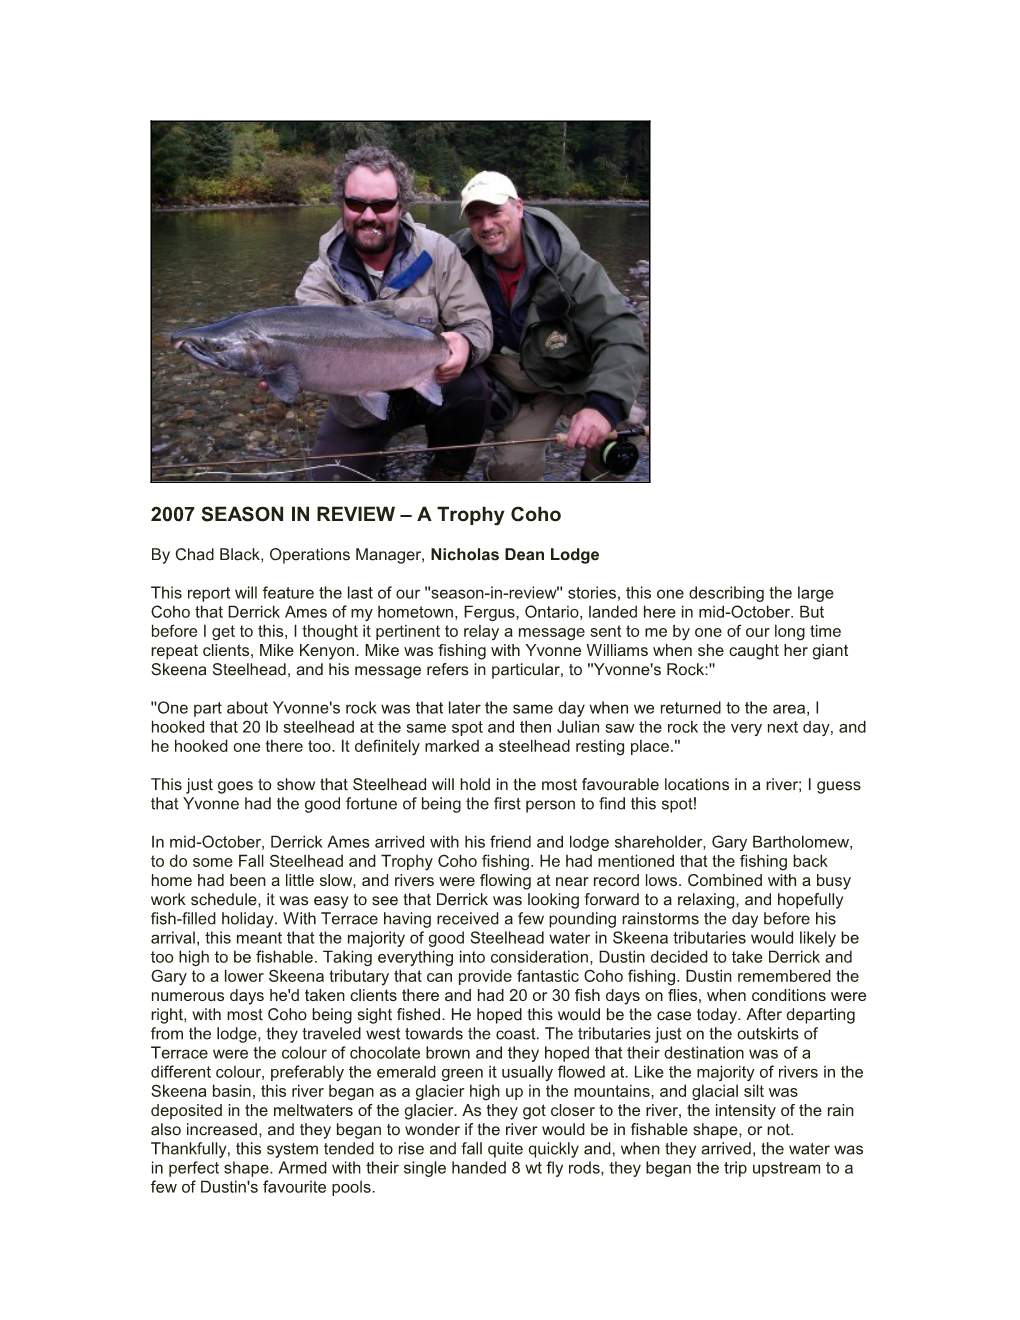 2007 SEASON in REVIEW a Trophy Coho